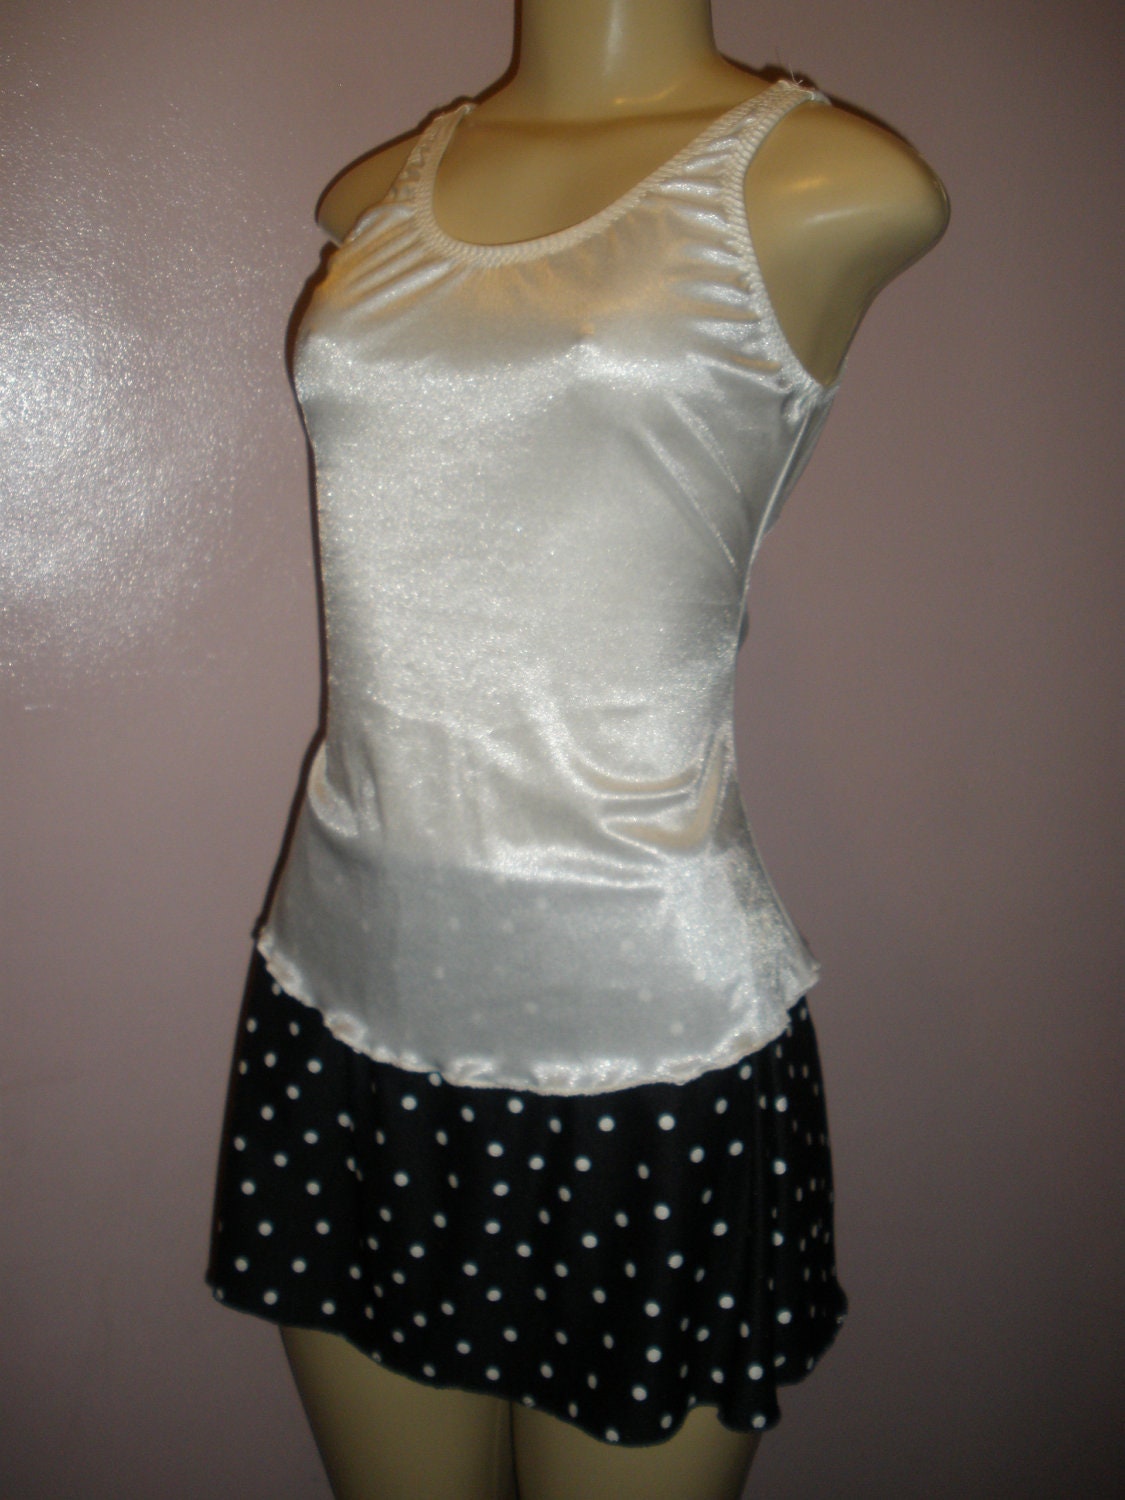 Cute 2 Piece Cream White Top with Black and White Polk A Dot Skirt Swim Suit Cover Up Size Meduim